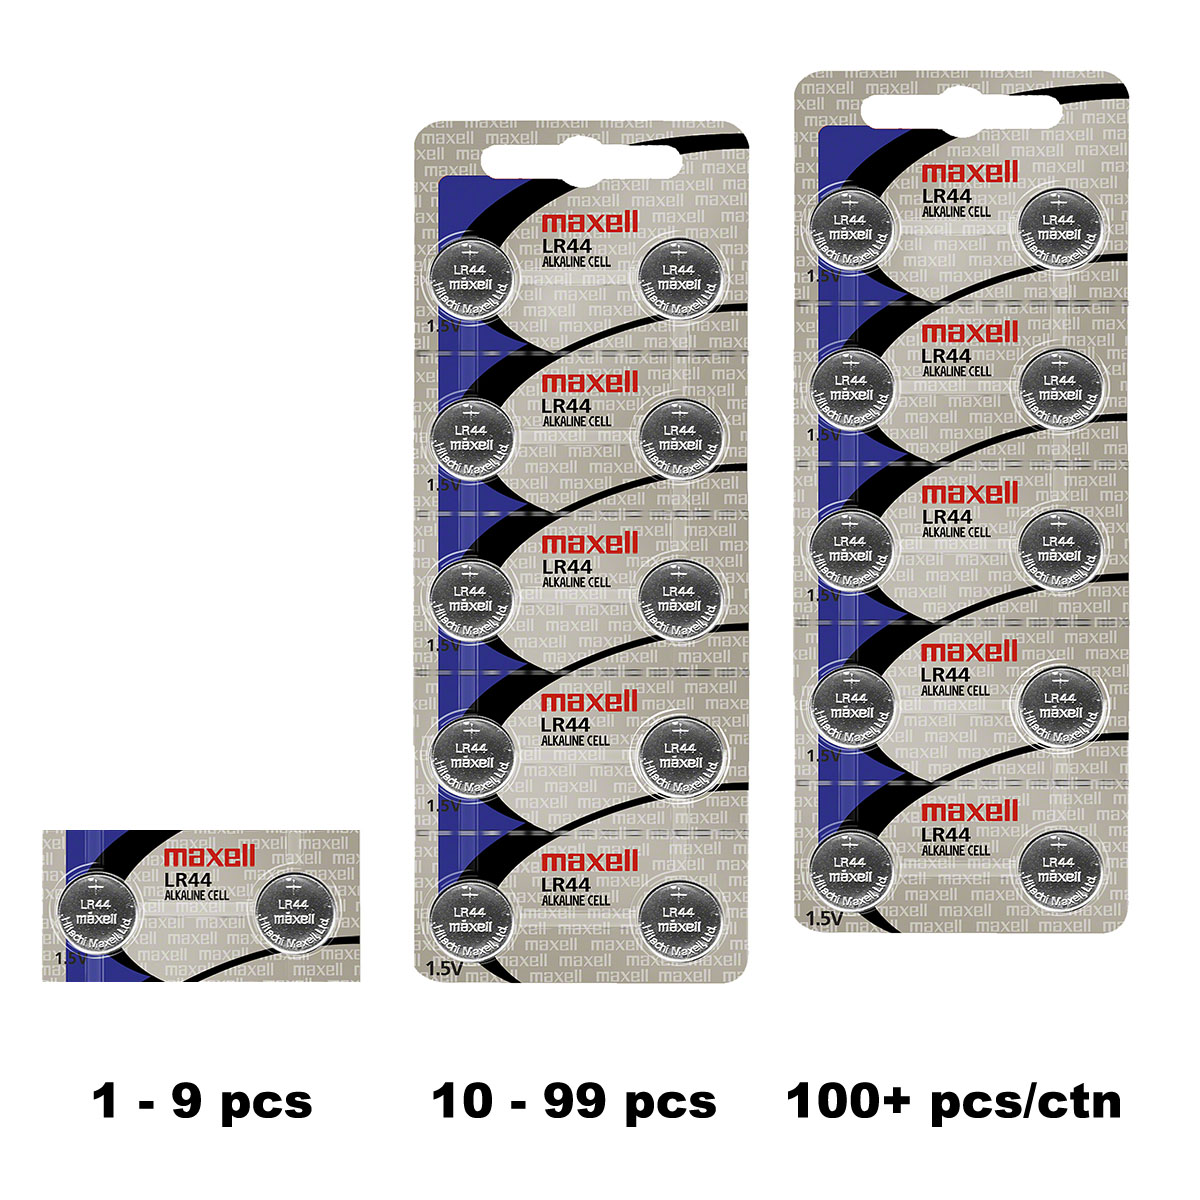 LR44 Batteries 10 Pack replaces maxell (Replaces: LR44, CR44, SR44, 357,  SR44W, AG13, G13, A76, A-76, PX76, 675, 1166a, LR44H, V13GA, GP76A, L1154